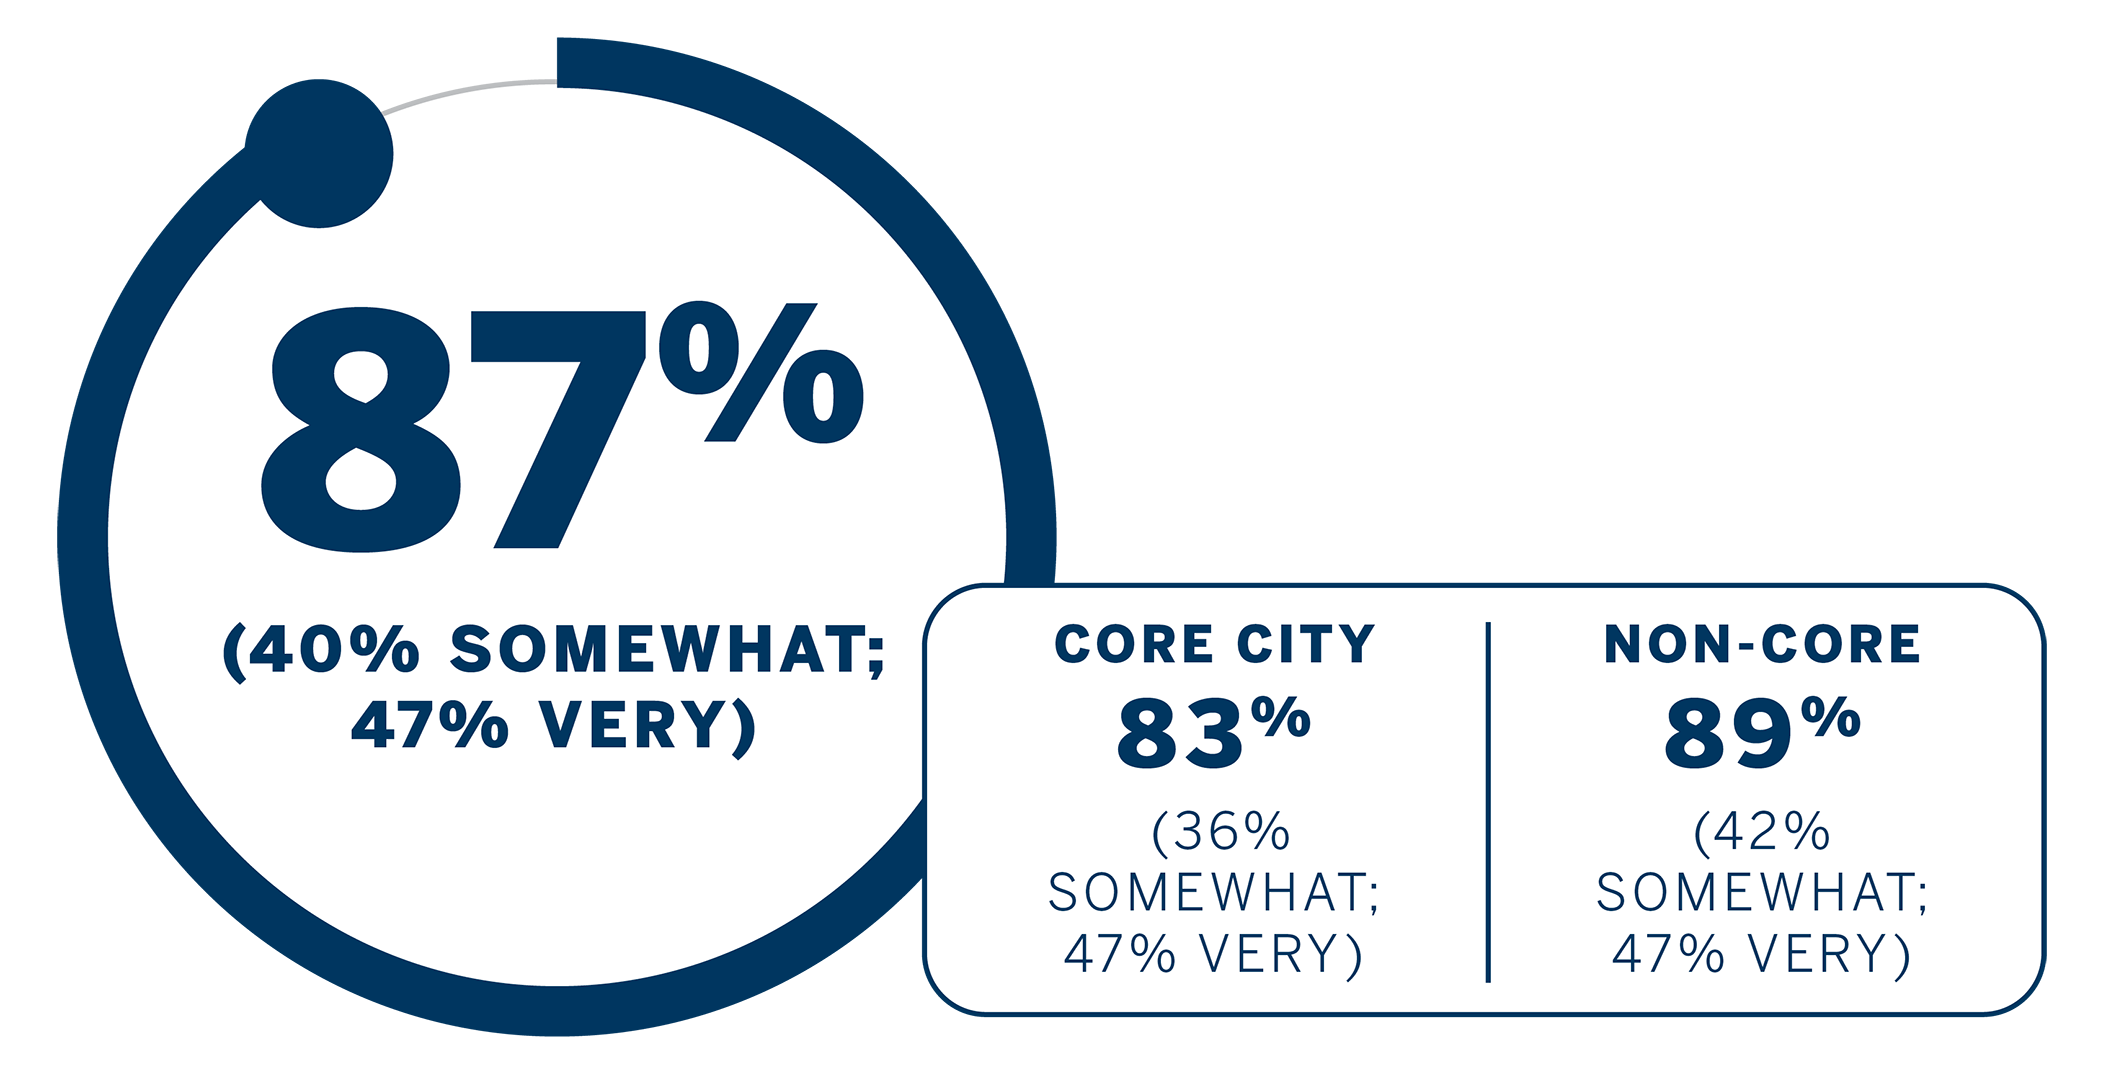 Managing Health Problems: 87% (broken down by 40% somewhat and 47% very); Core City: 83% (broken down by 36% somewhat and 47% very); None-Core: 89% (broken down by 42% somewhat and 47% very)